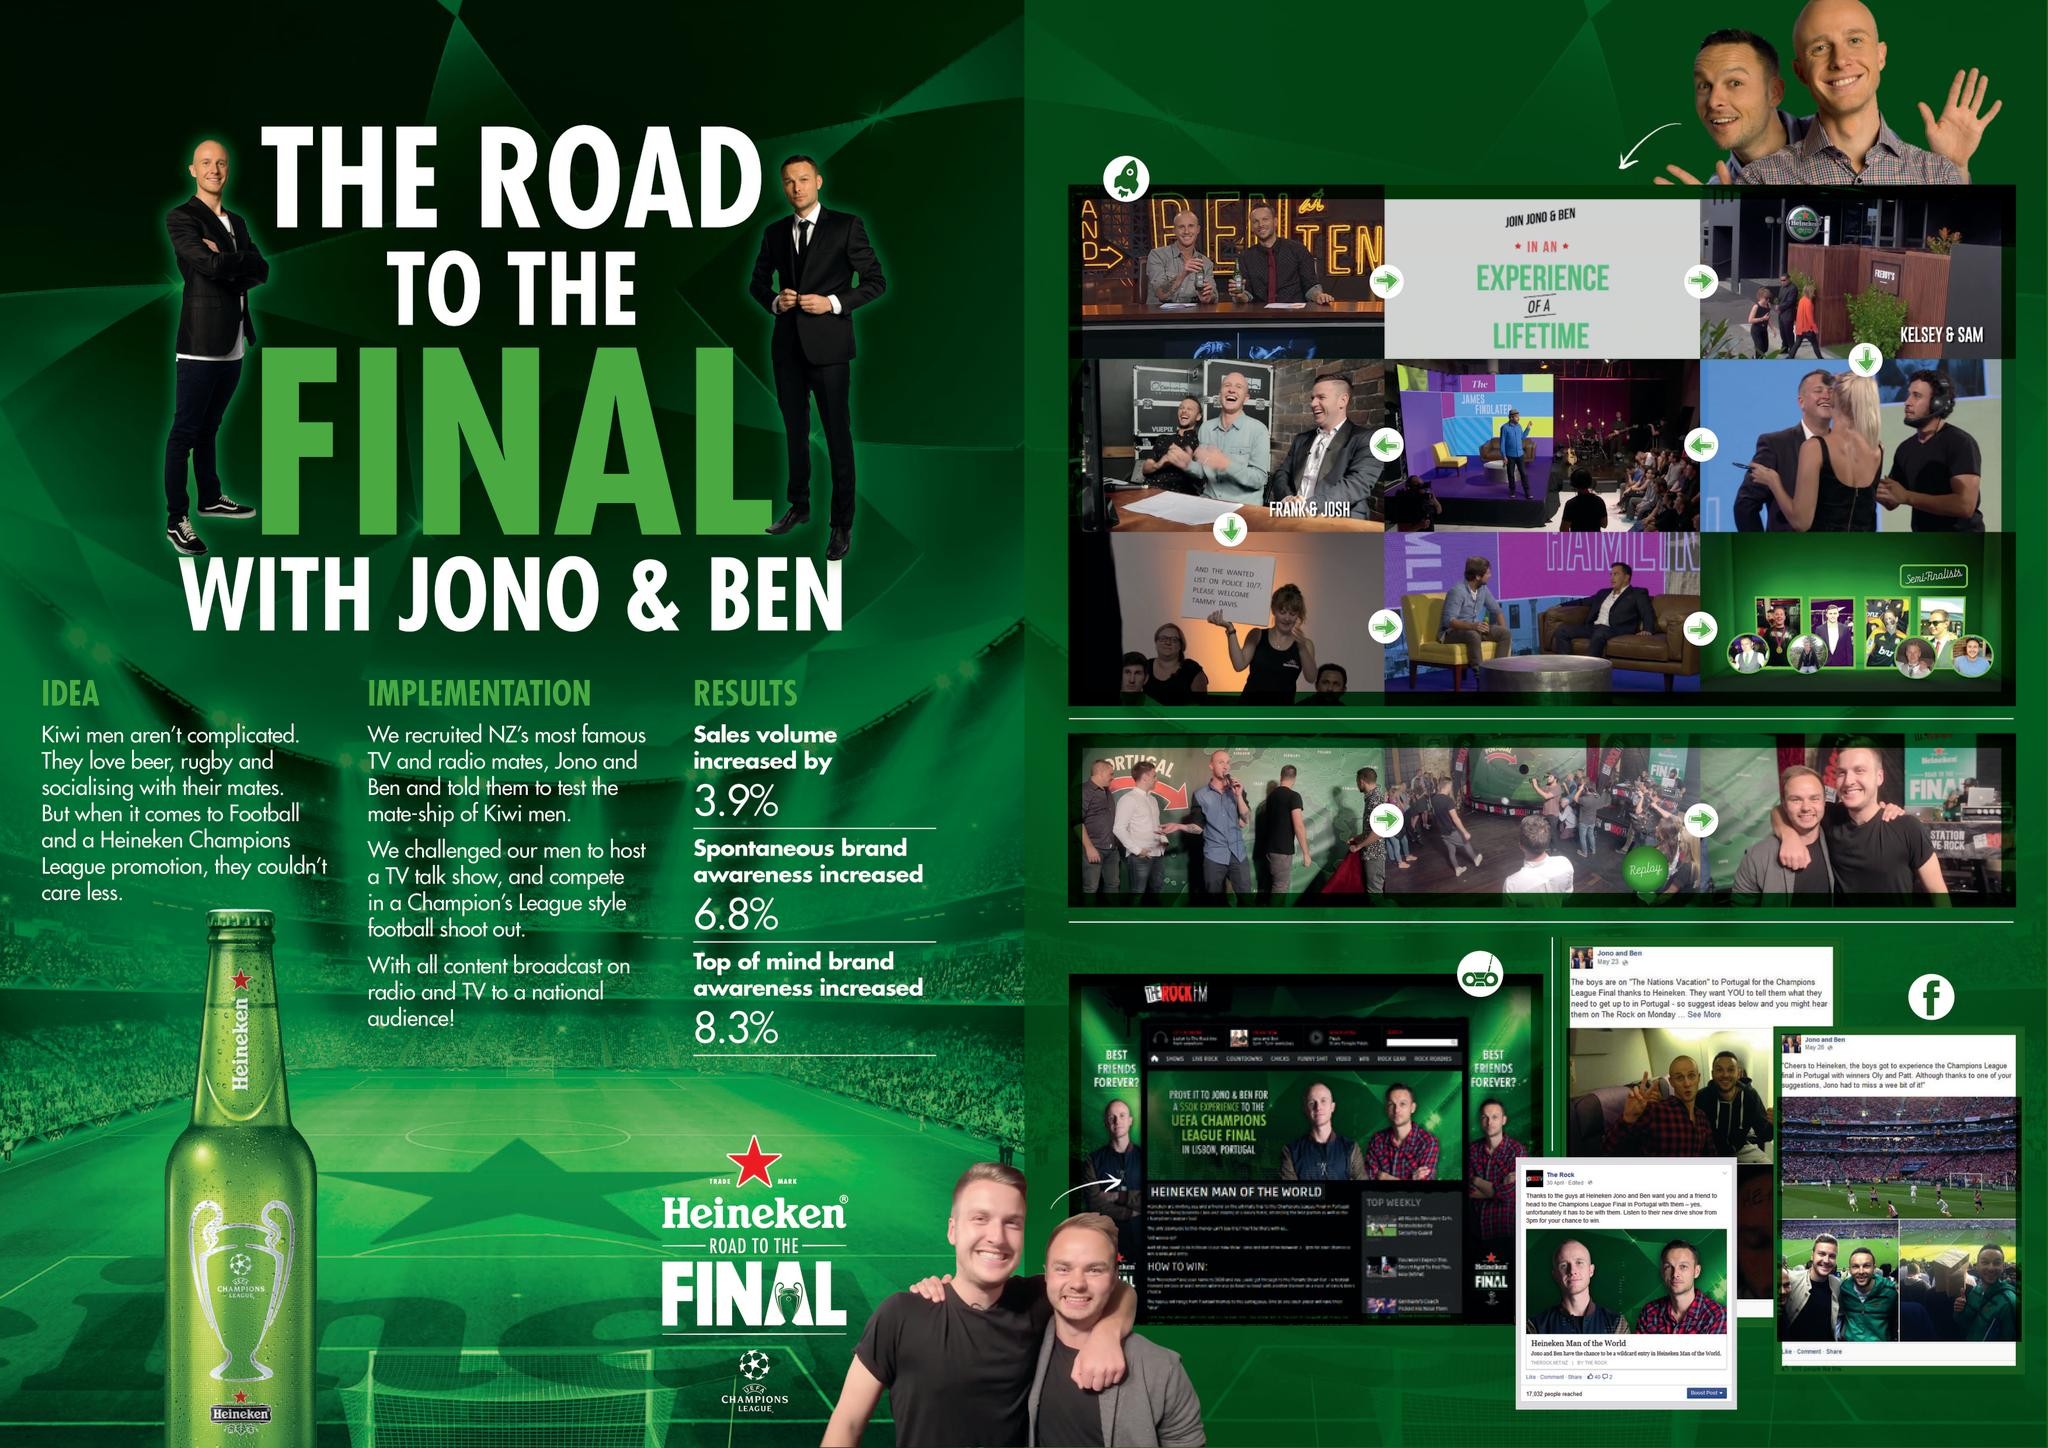 THE ROAD TO THE FINAL WITH JONO AND BEN